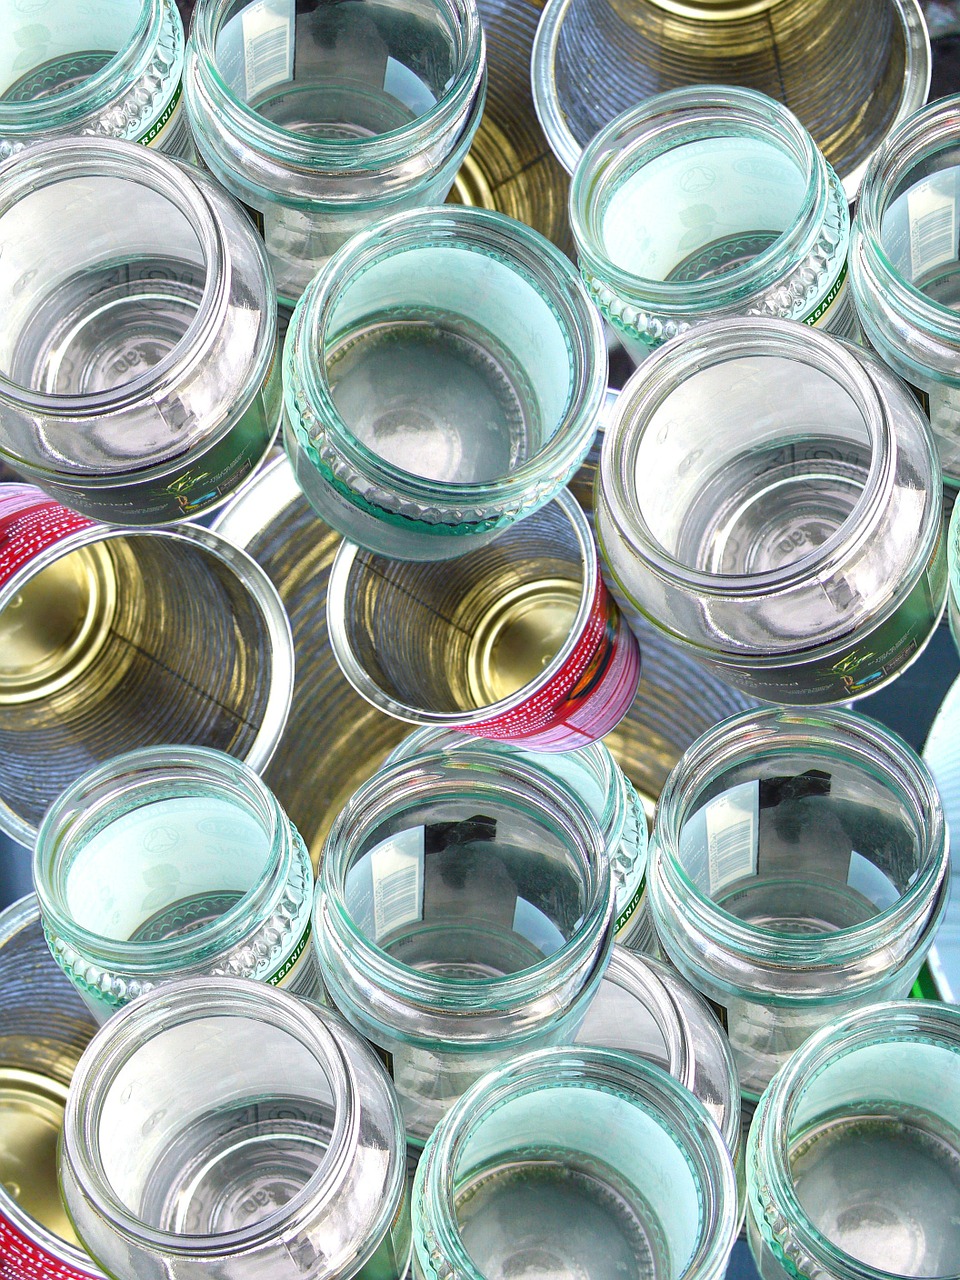 glass recycling cans free photo